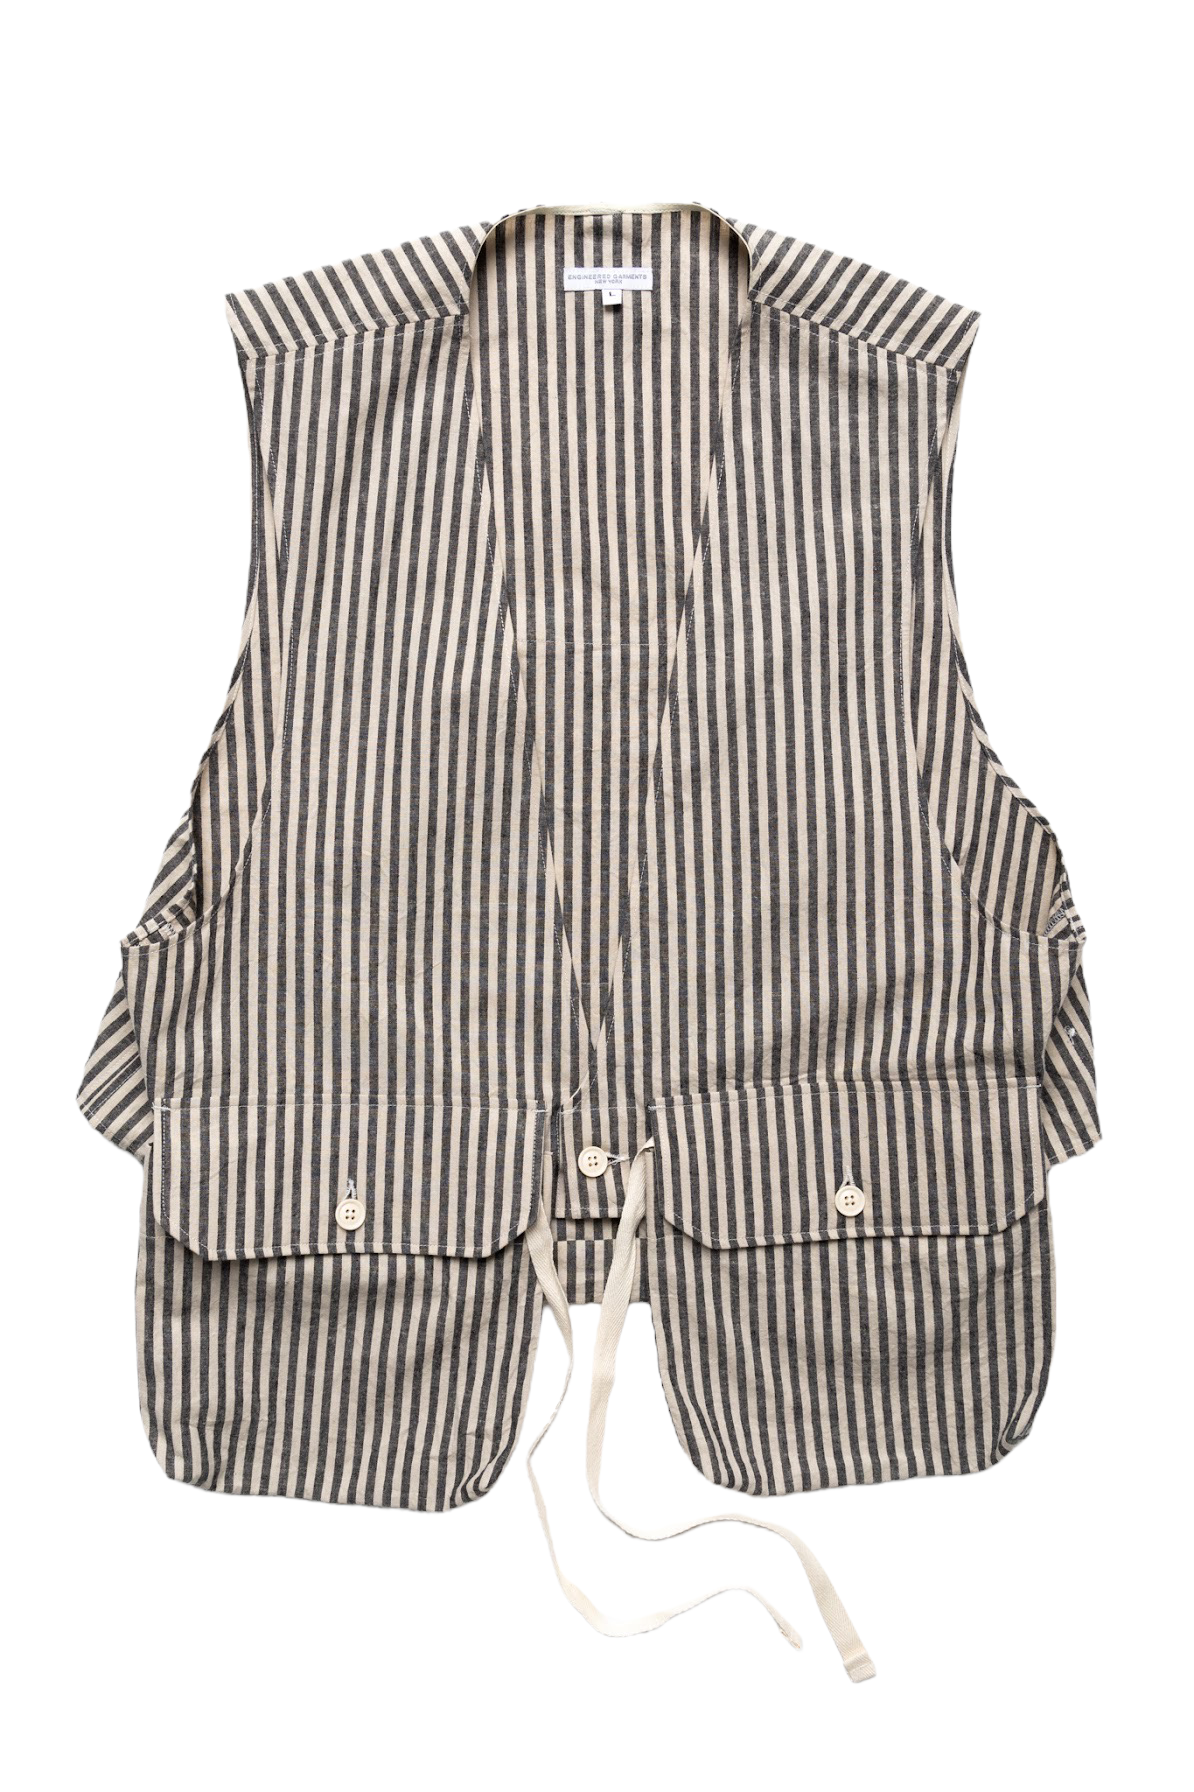 Engineered Garments uniquely arranged pinstripe vest featuring dual front pockets that can be tied together at the front. Pair with any outfit for an elevated utility look. Color: Natural/Black 55% linen, 45% cotton Made in USA Model is 6'3 wearing a size L. Unisex. 